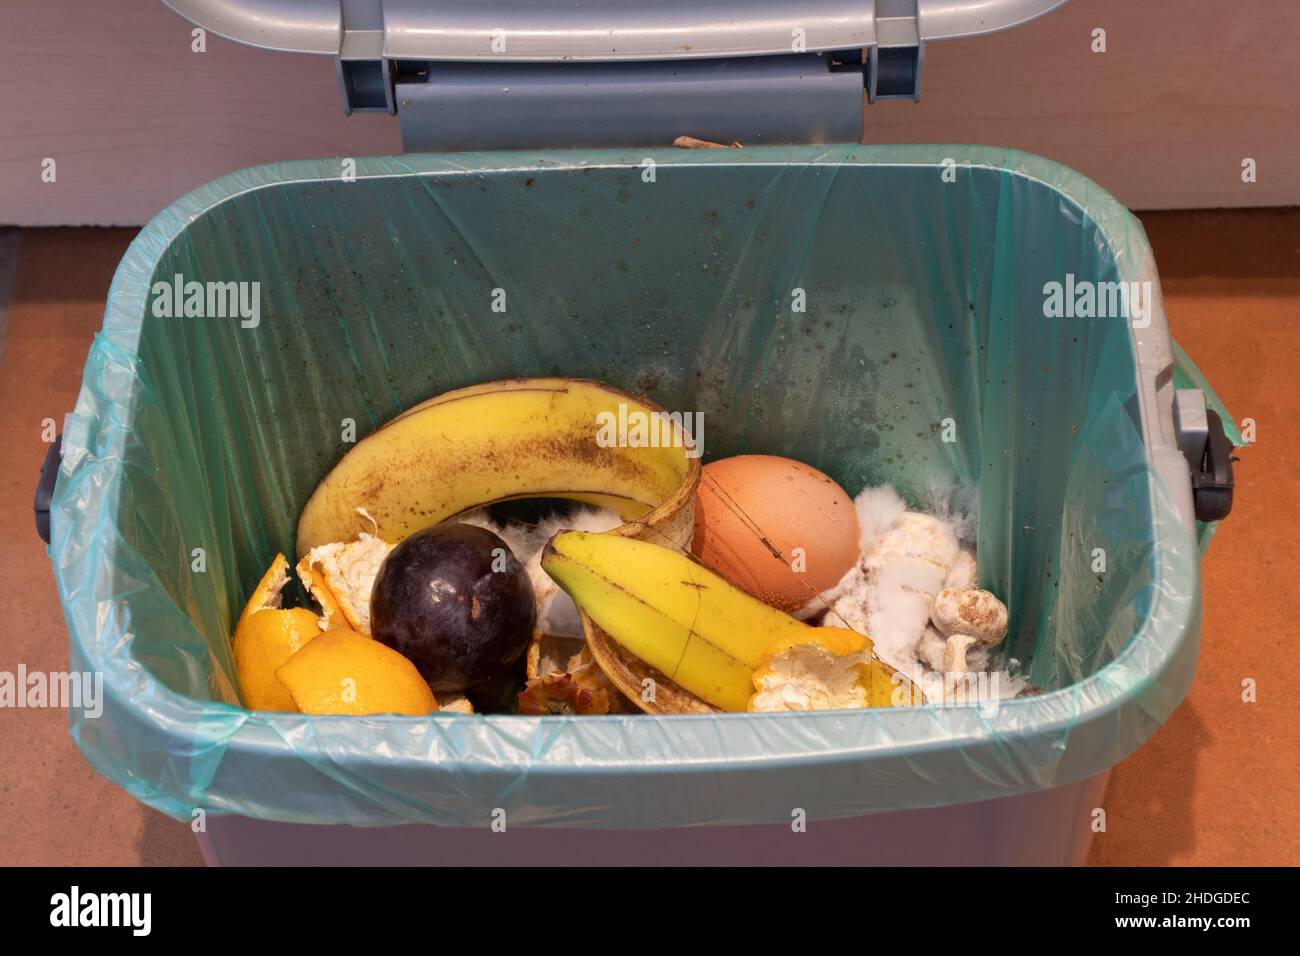 Small indoor food waste caddy for recycling via anaerobic digestion, UK. Stock Photo